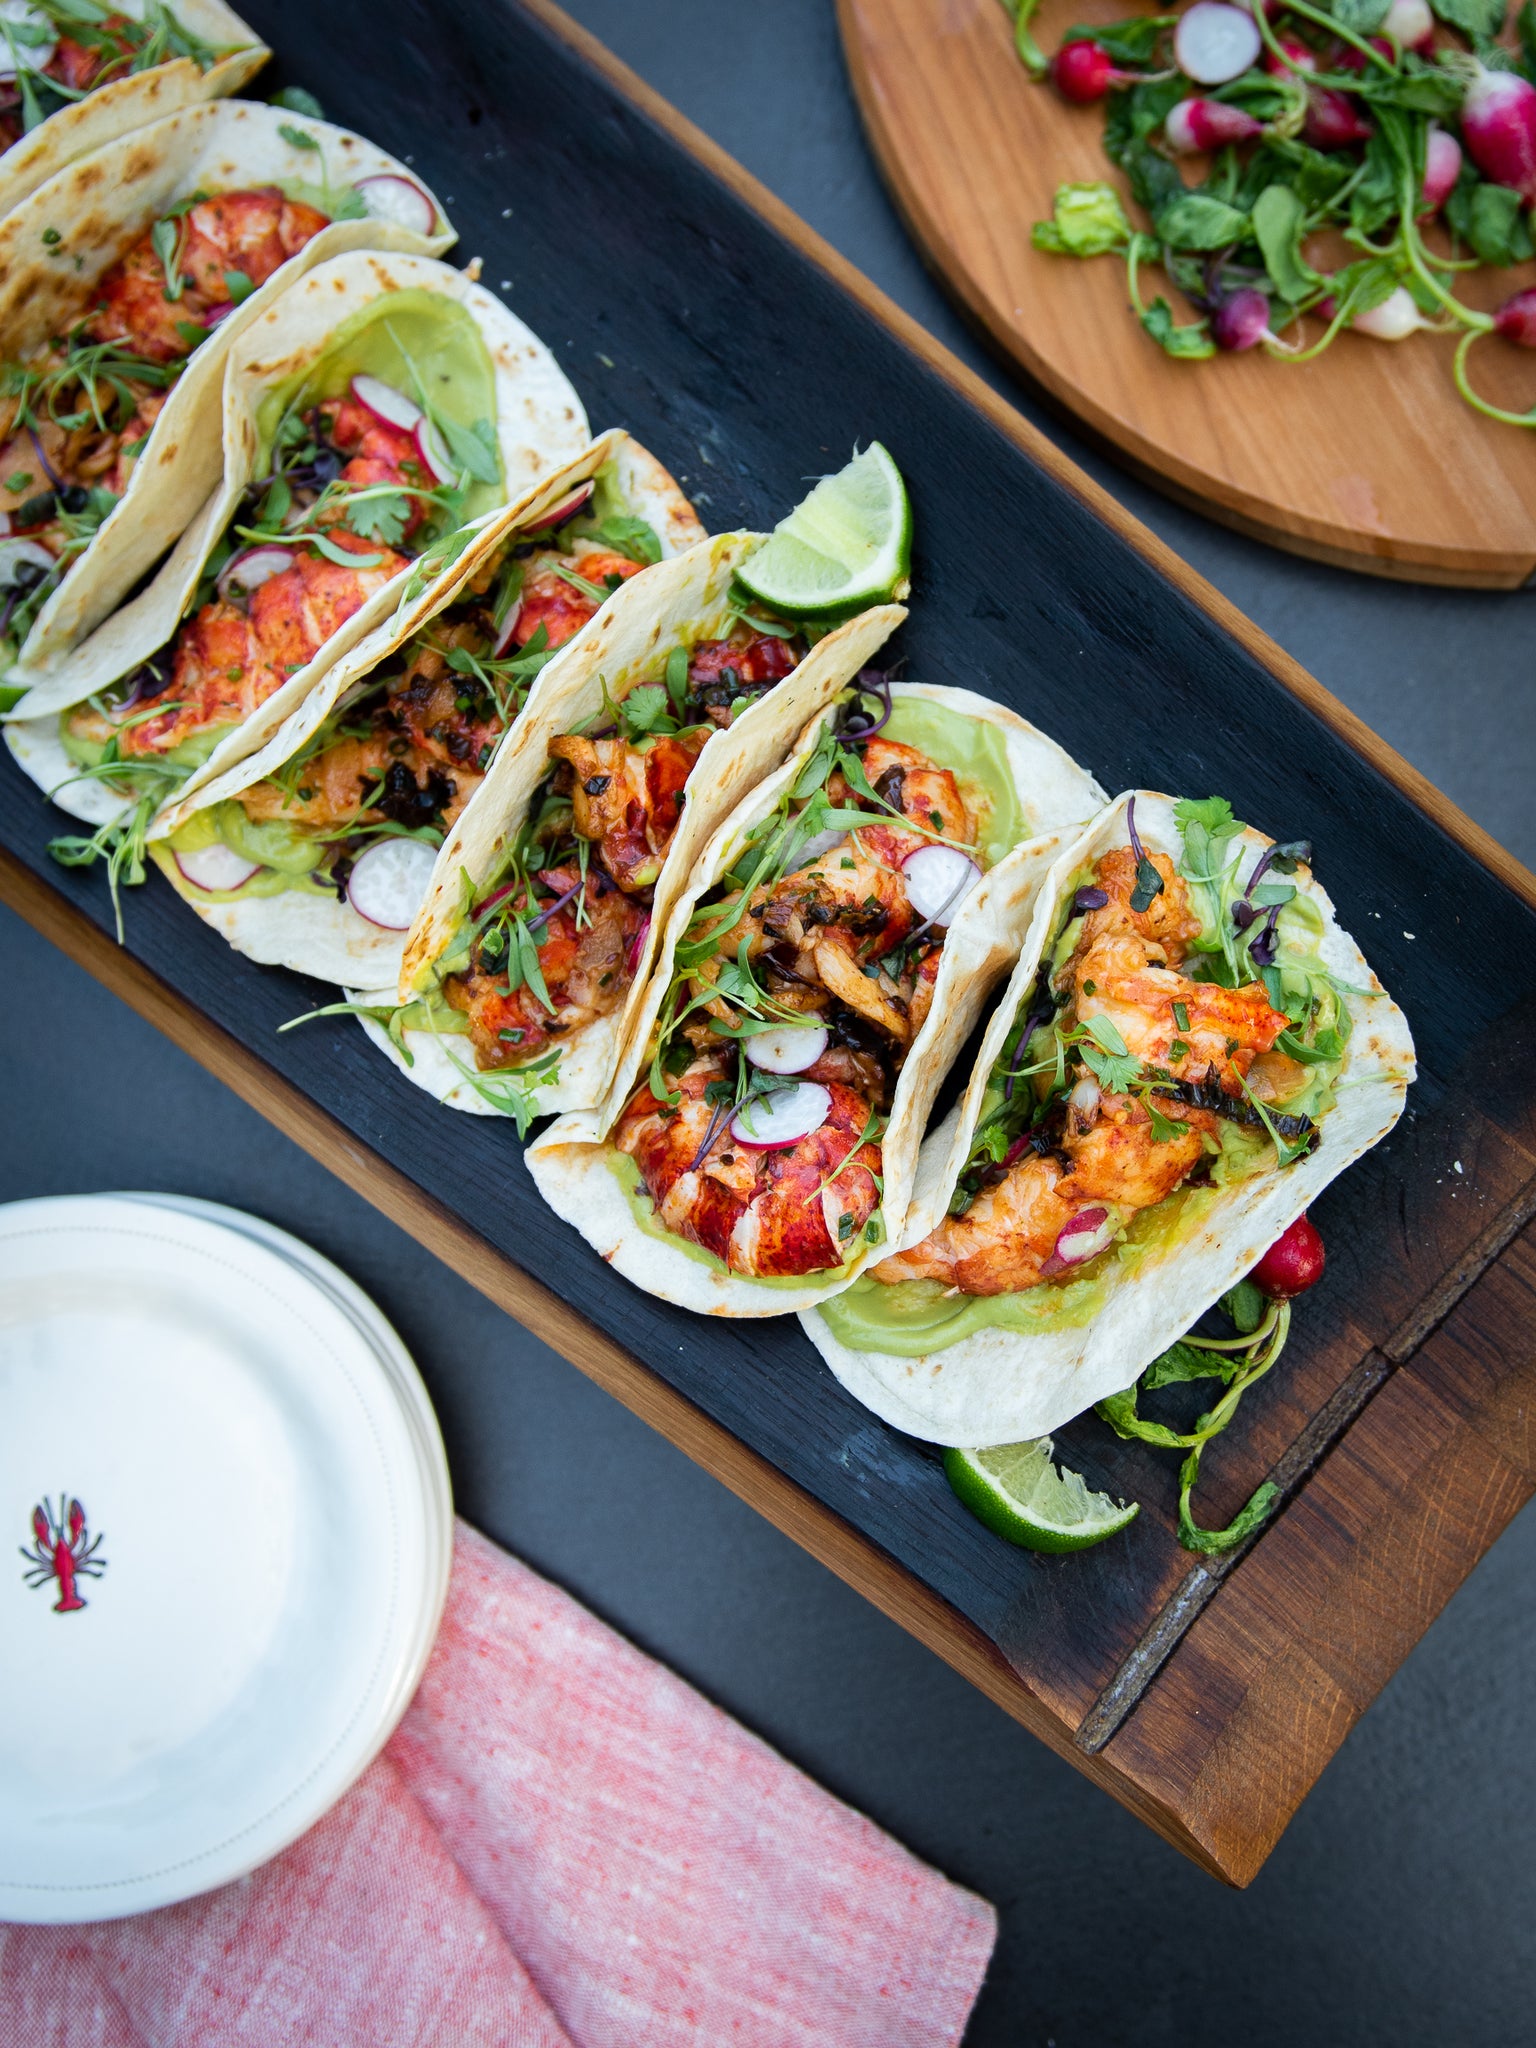 OFYR Lobster Tacos with Avocado Crema, Radish and Sprouts|Weston Table